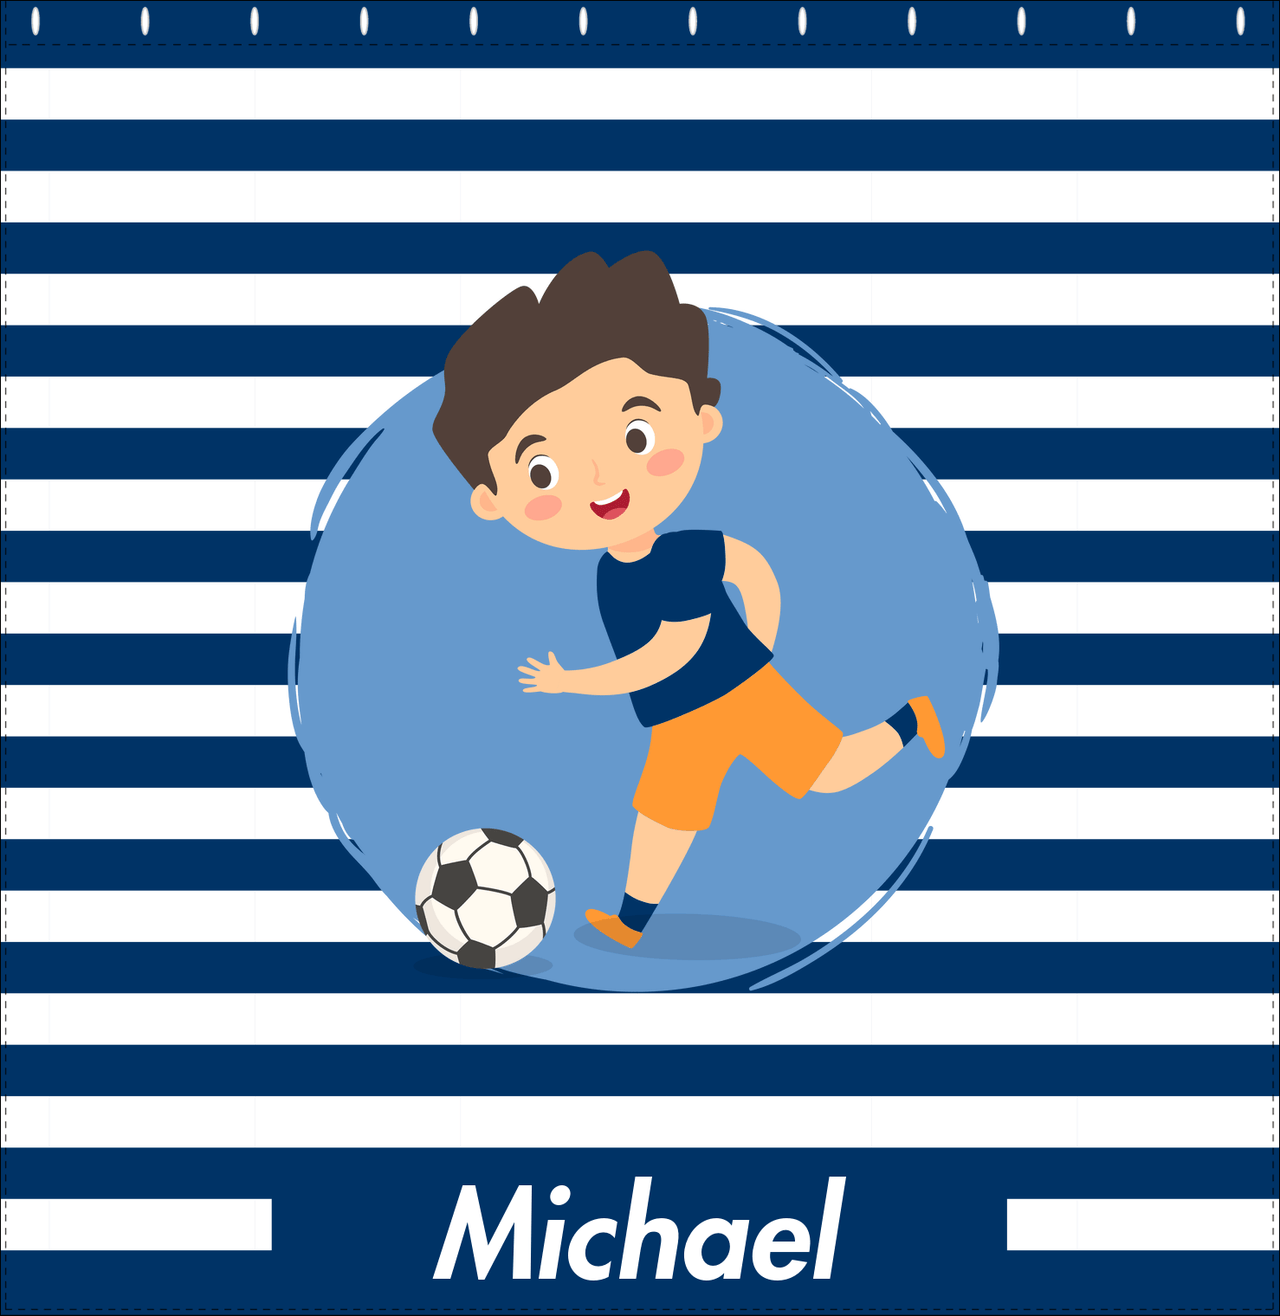 Personalized Soccer Shower Curtain XXIV - Blue Background - Black Hair Boy - Decorate View